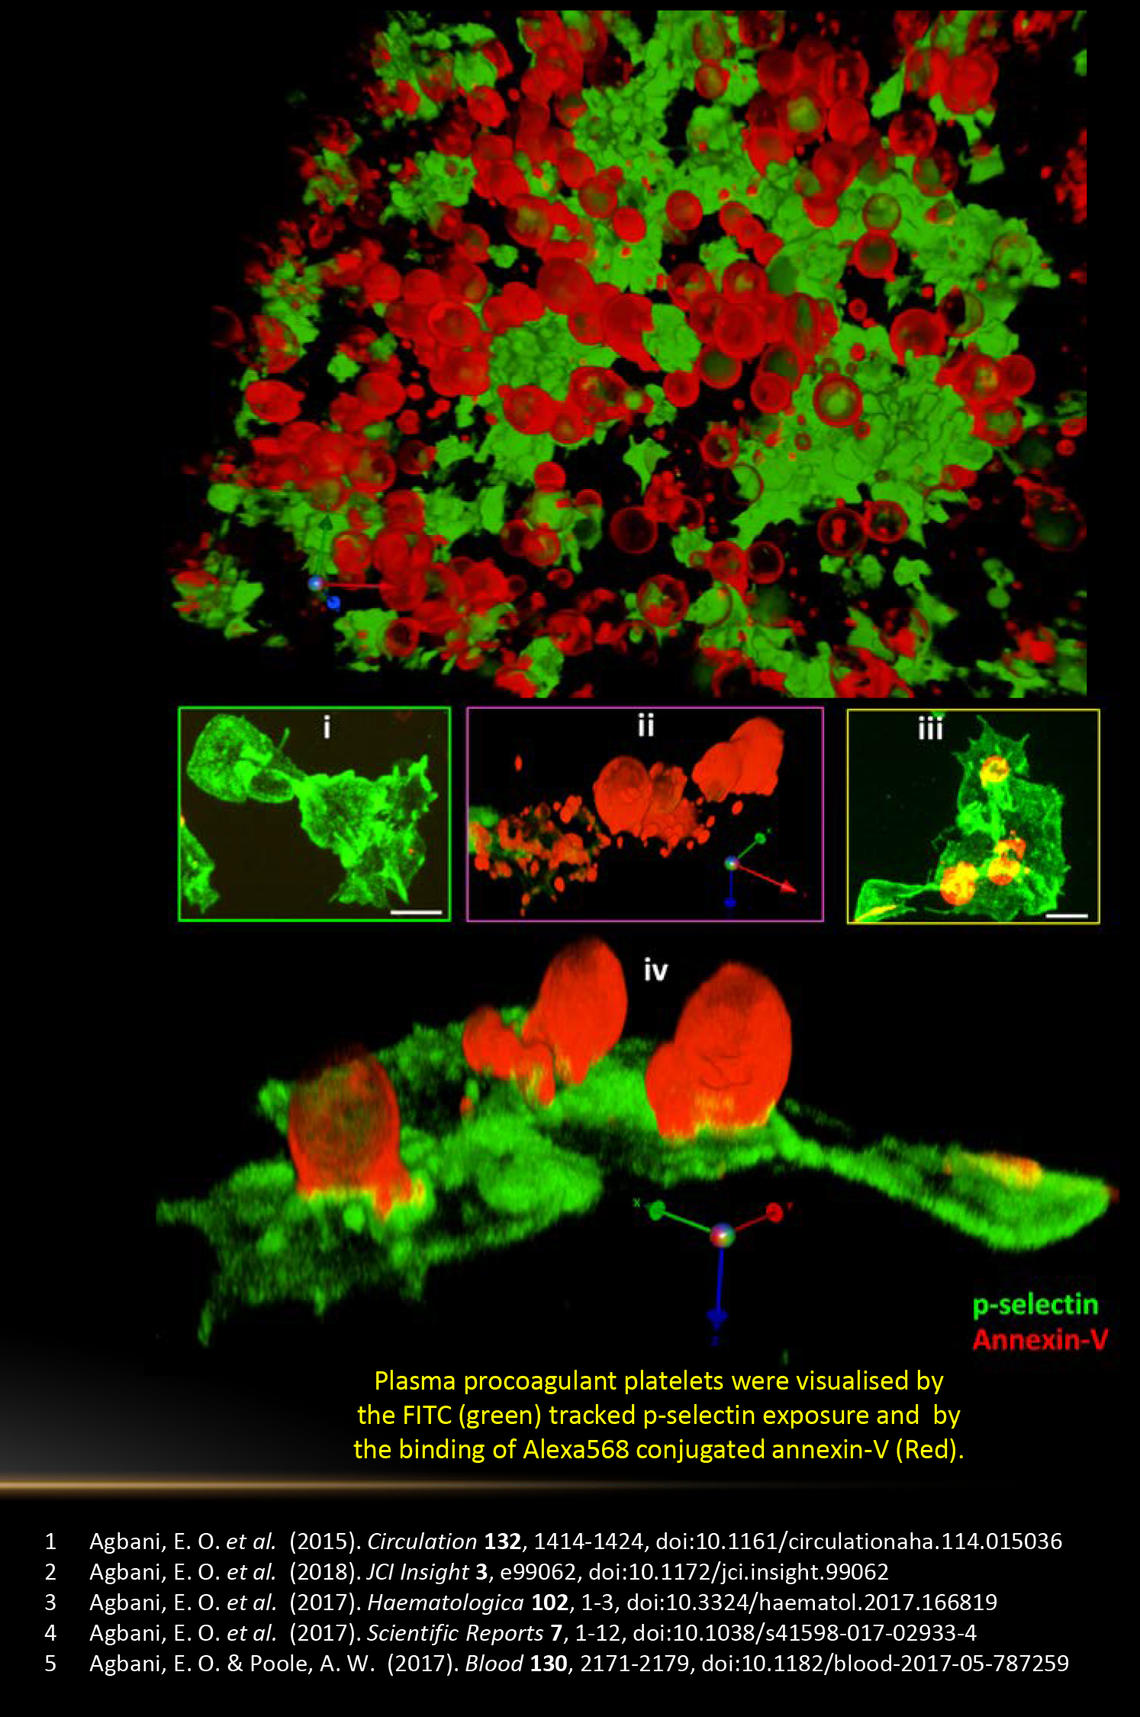 Plasma procoagulant platelets were visualised by the FITC (green) tracked p-selectin exposure and  by the binding of Alexa568 conjugated annexin-V (Red).